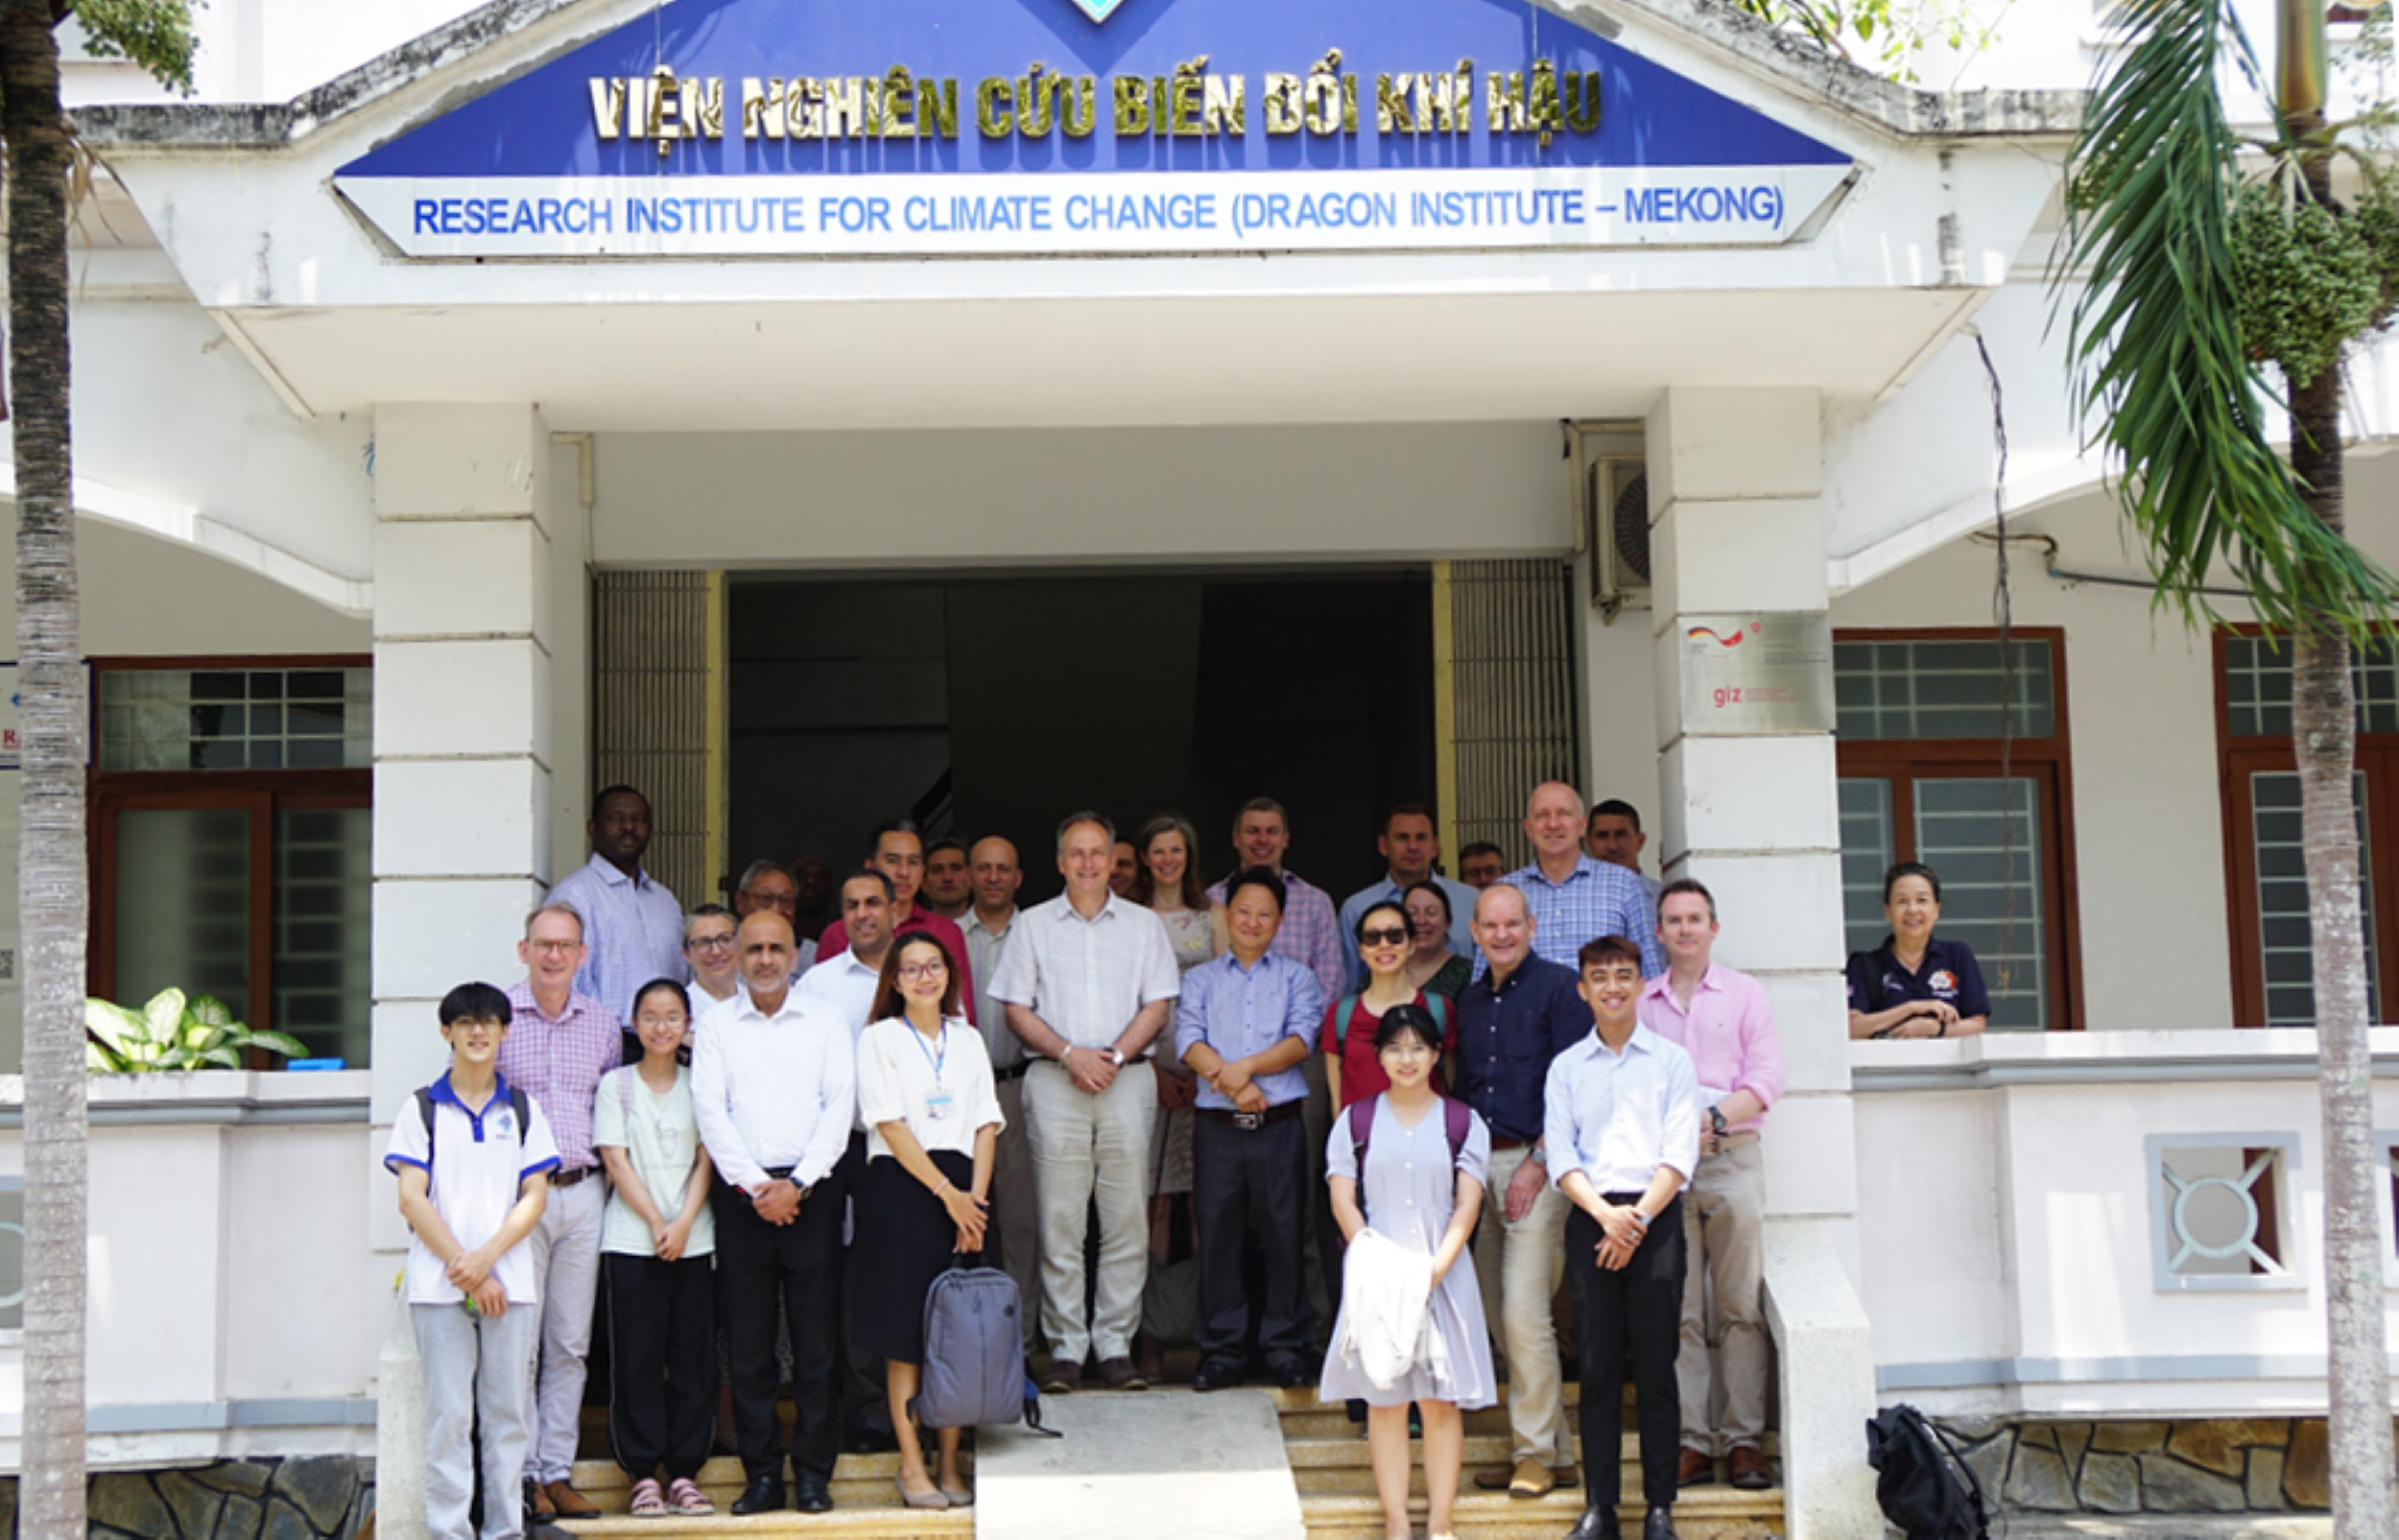 International Learning Program on the Impacts of Climate Change in the Vietnamese Mekong Delta